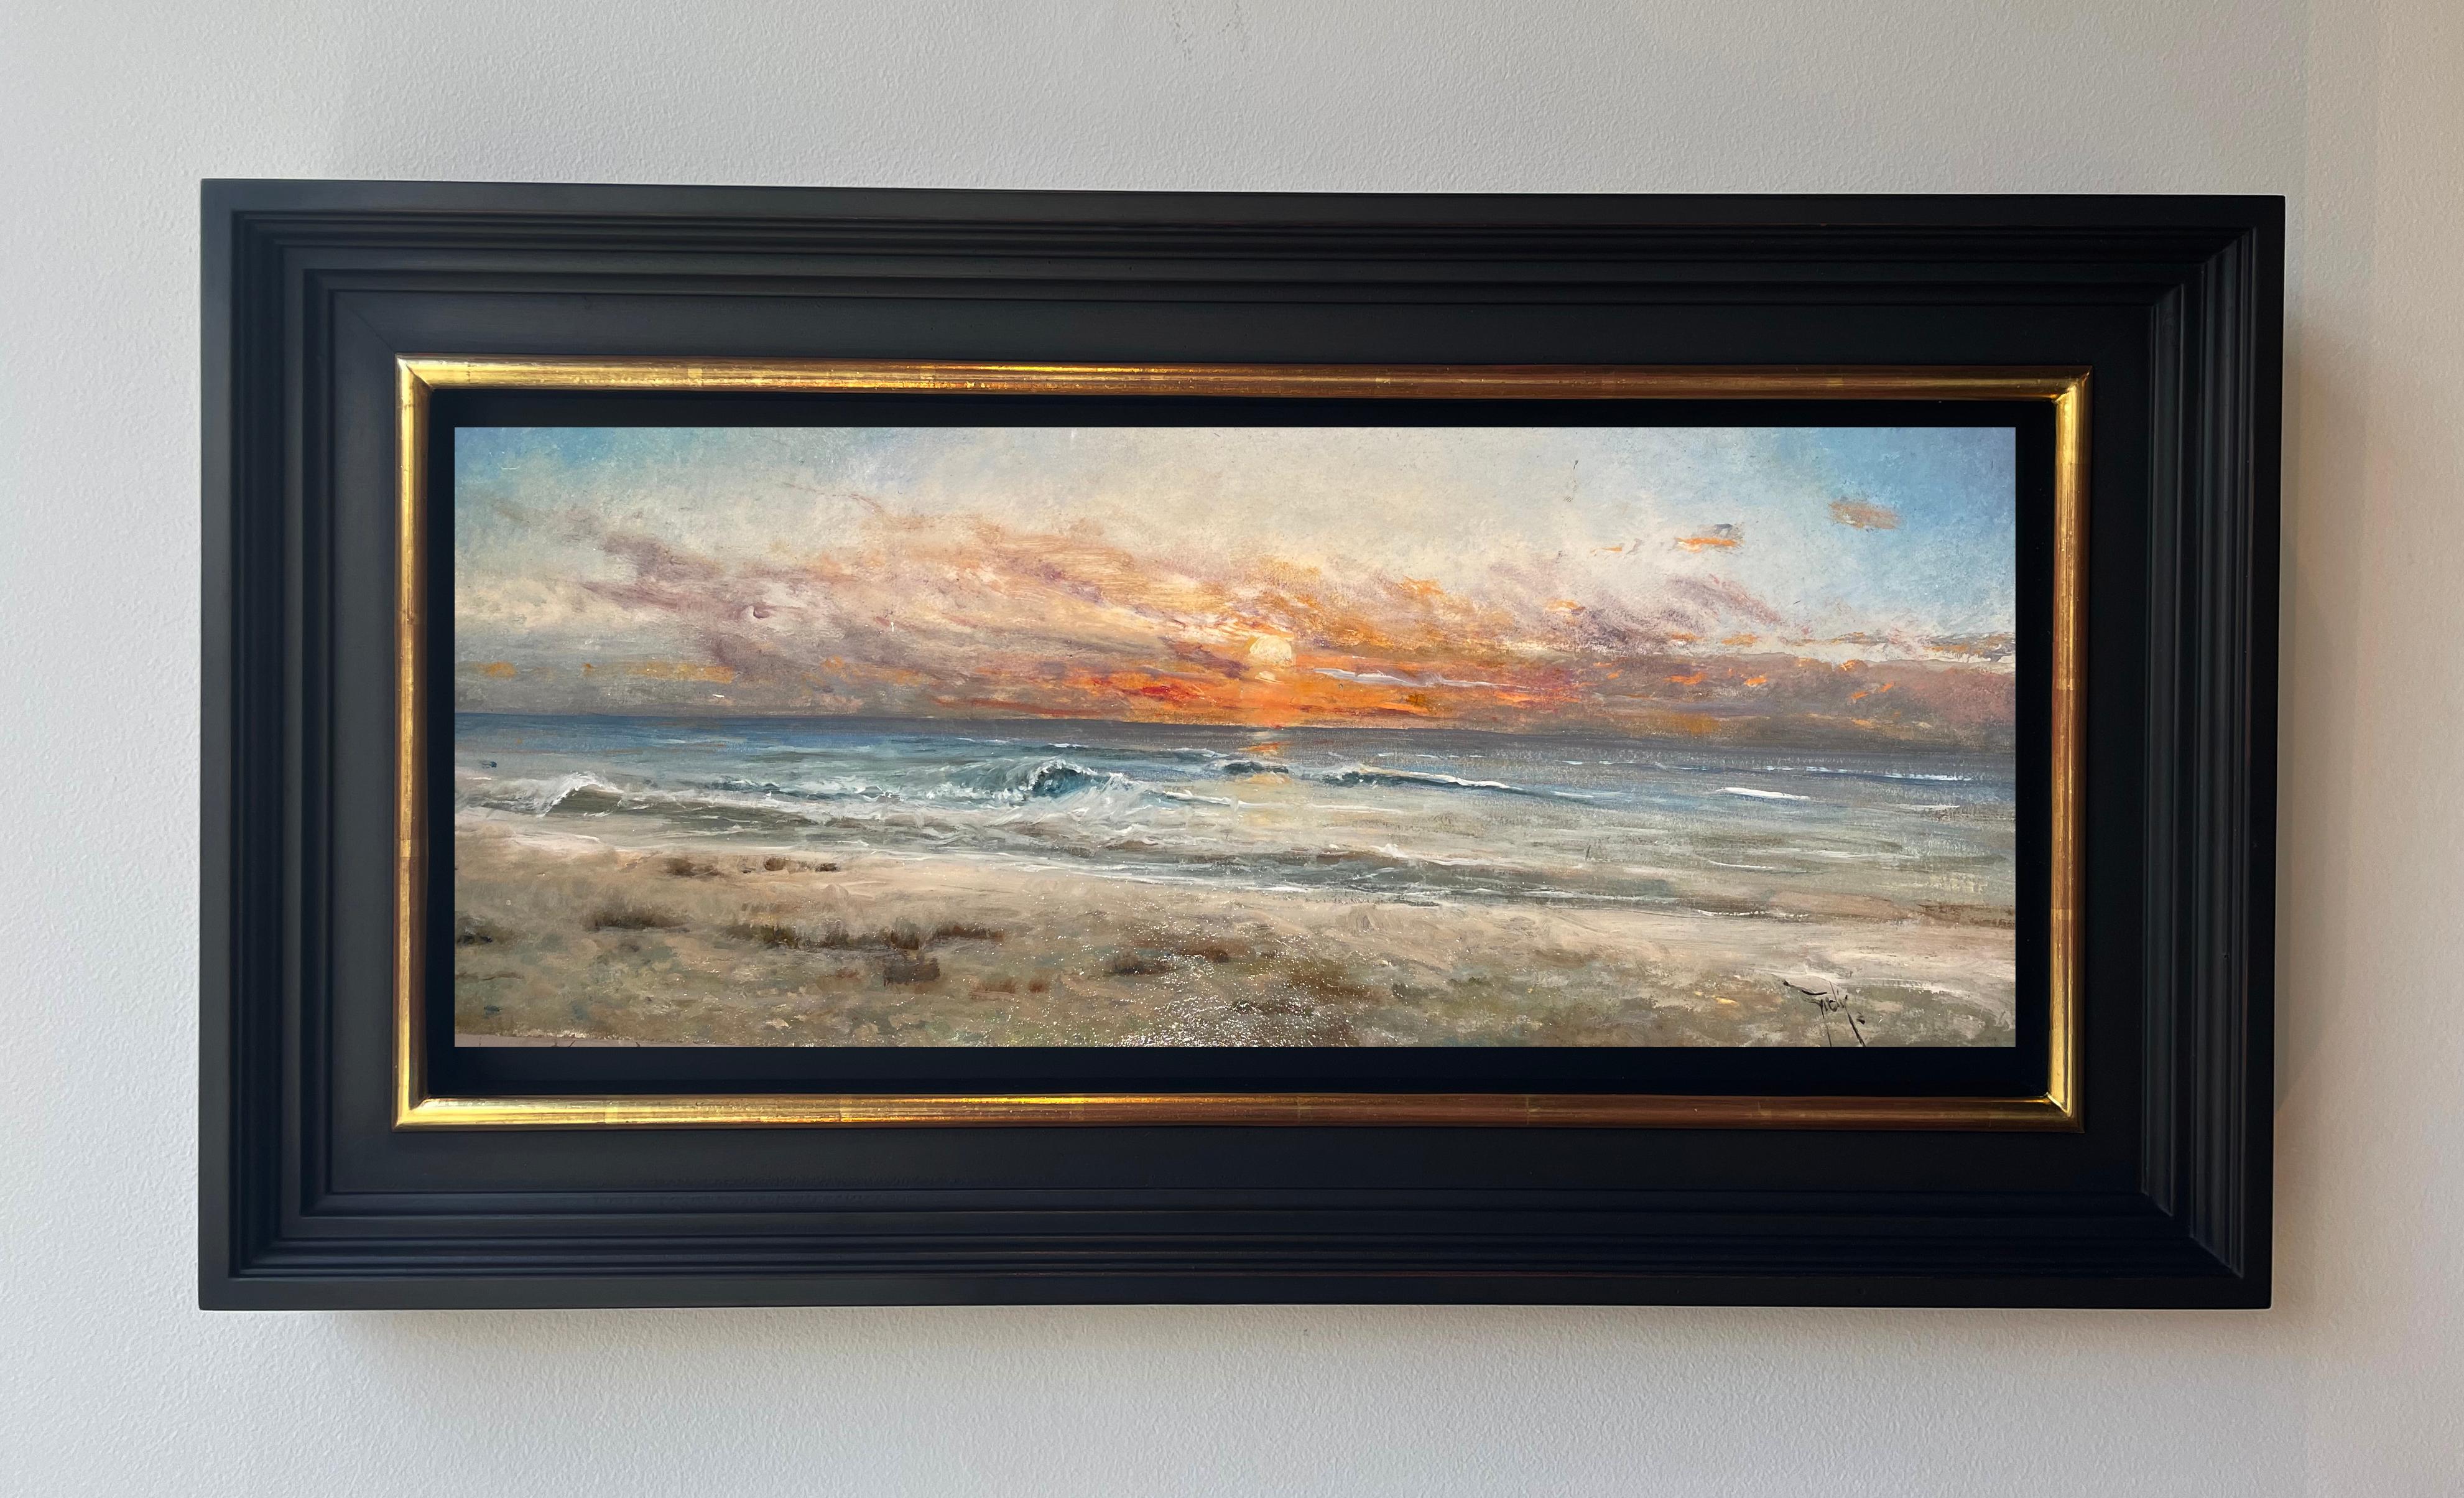 'Sunset Beach' Contemporary Seascape painting of the waves, sand and setting sun - Painting by Ignacio Trelis 